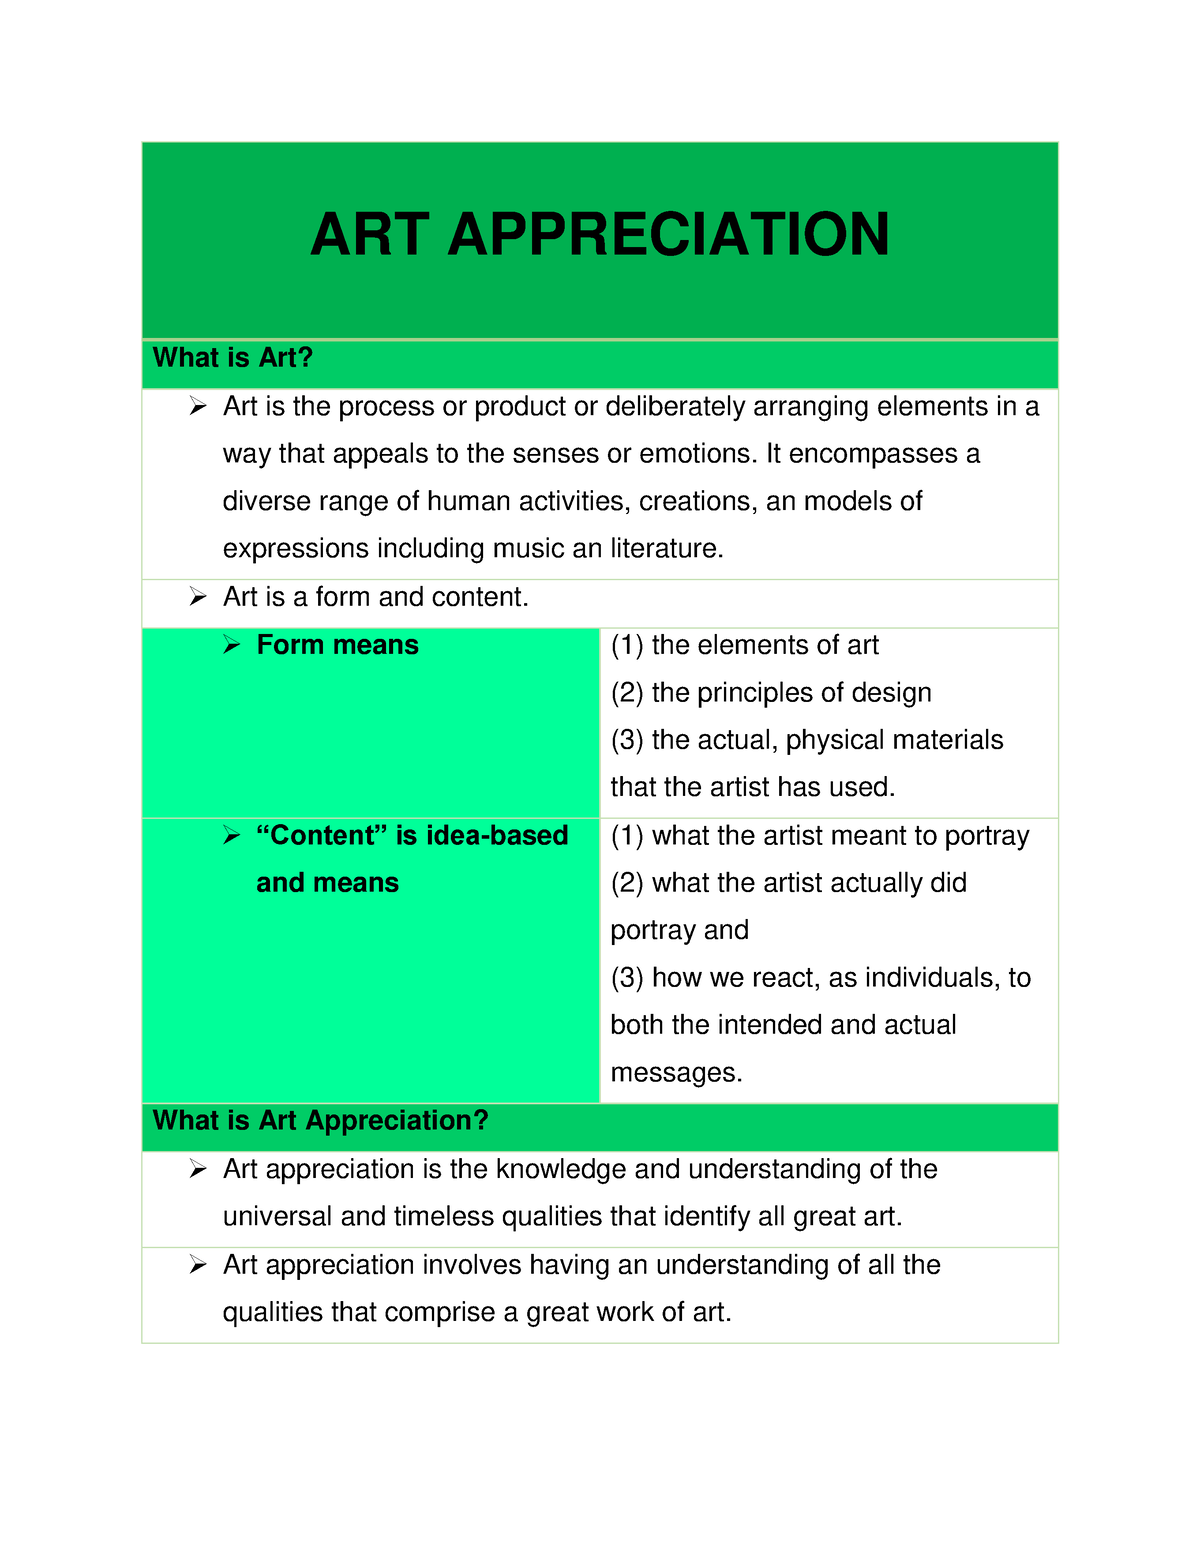 what is art appreciation in your own words essay